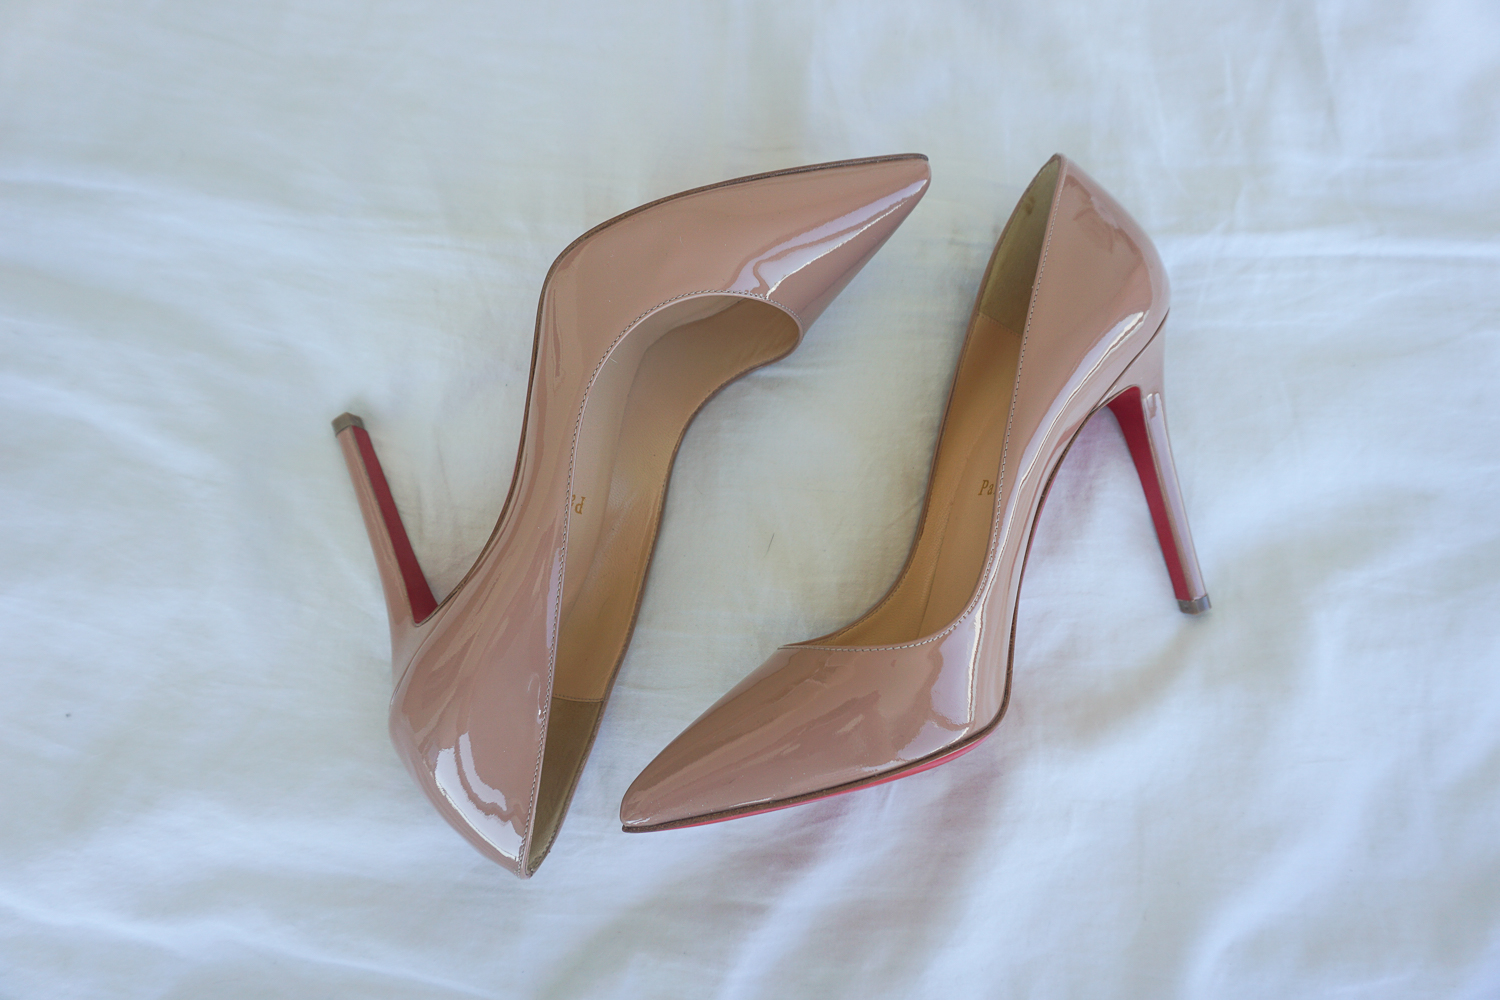 Christian Louboutin Heels Are Worth the Splurge; Here are 7